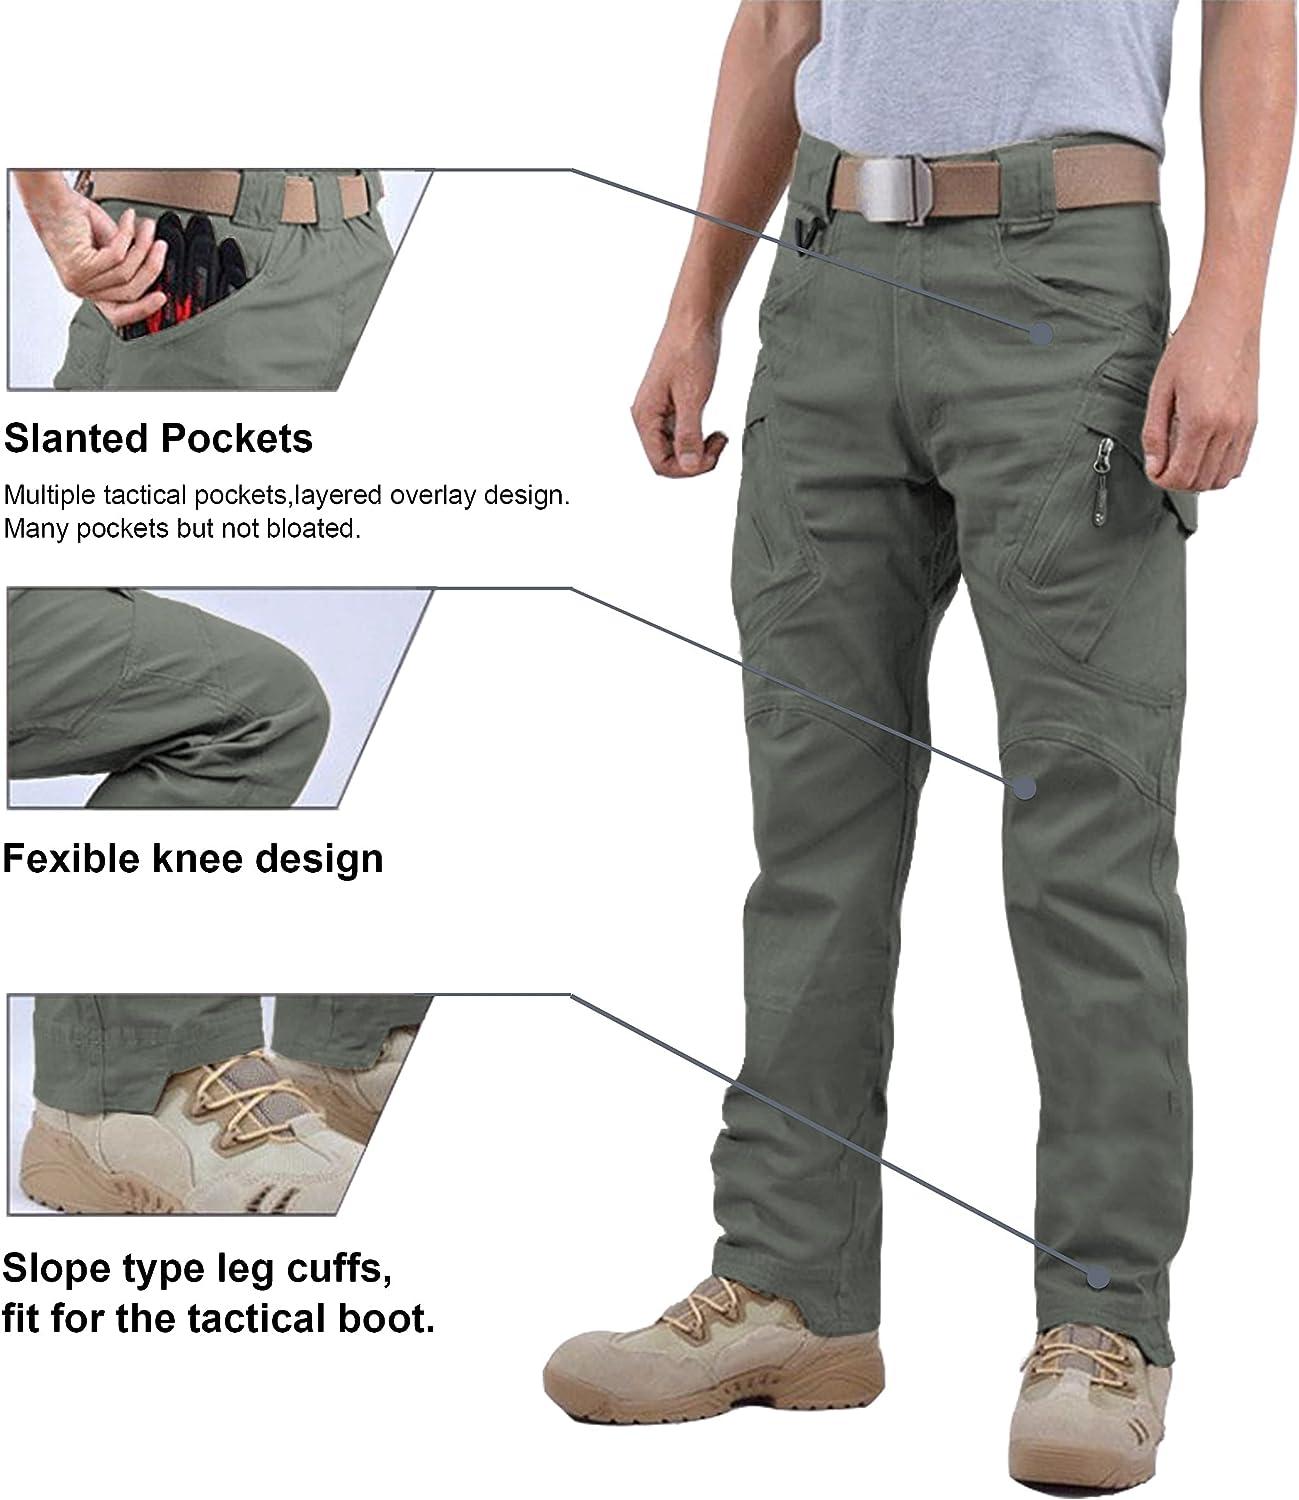 Cotton Cargo Pants For Men Stretchable, Flexible, And Casual Army Trousers  Mens With Multiple Pockets For Combat, SWAT, Army, Or Military Use  Available In Sizes 28 40 230515 From Kong02, $17.6 | DHgate.Com